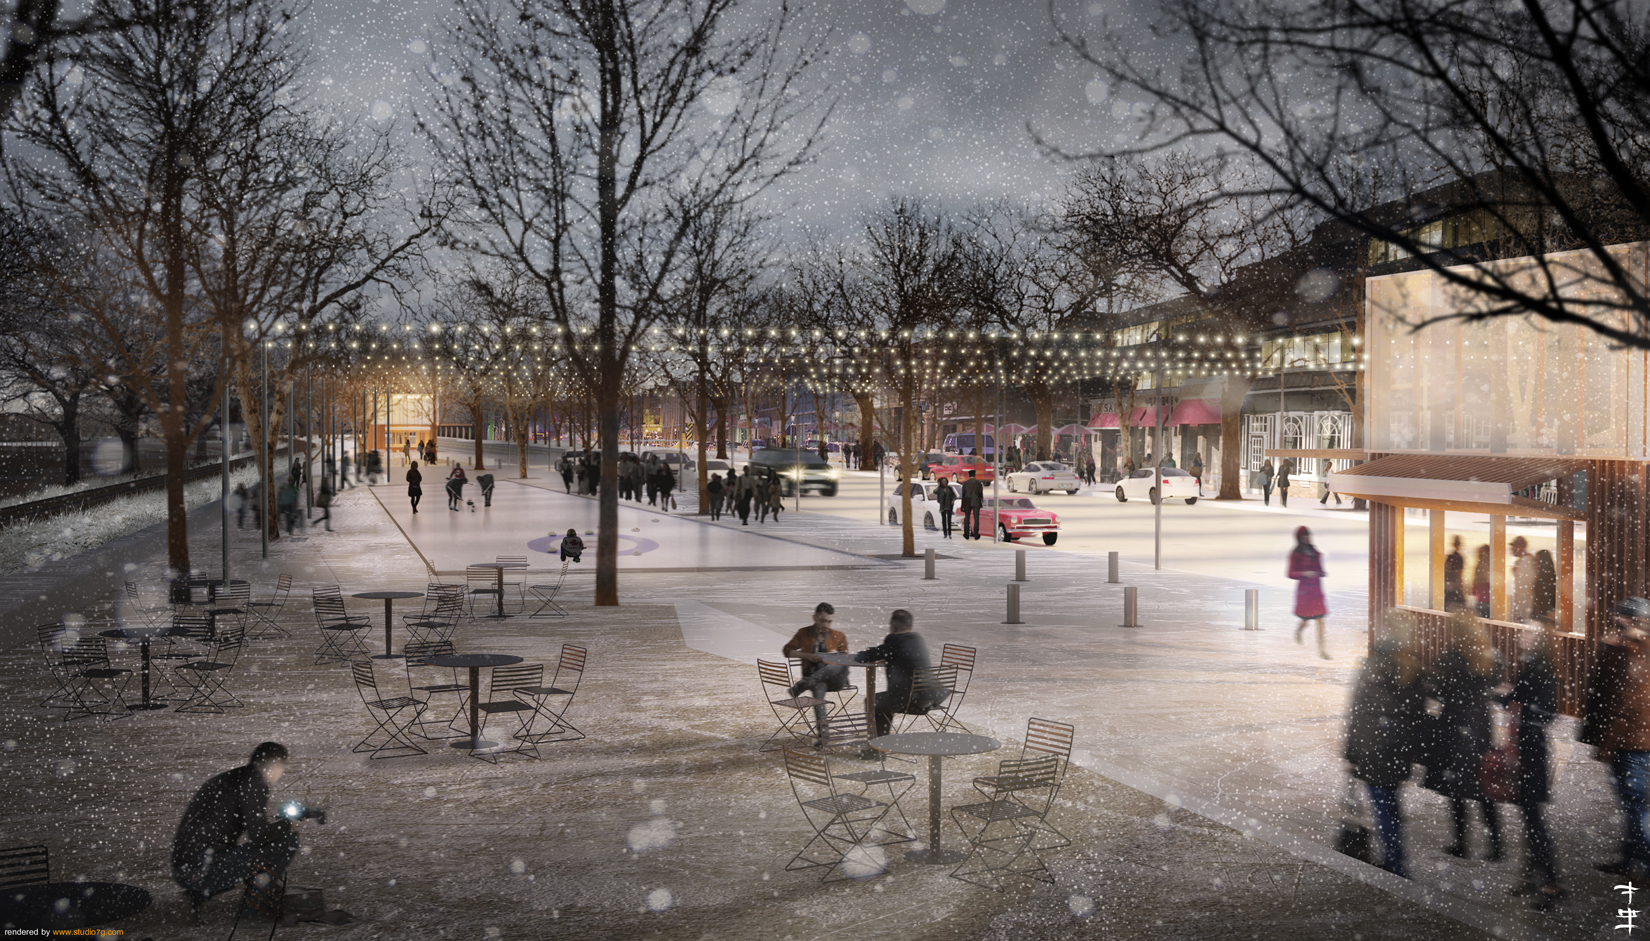 The Civitas designed all-season plaza is part of the Lake Effect vision plan, which would host a variety of events to engage the Wayzata community.